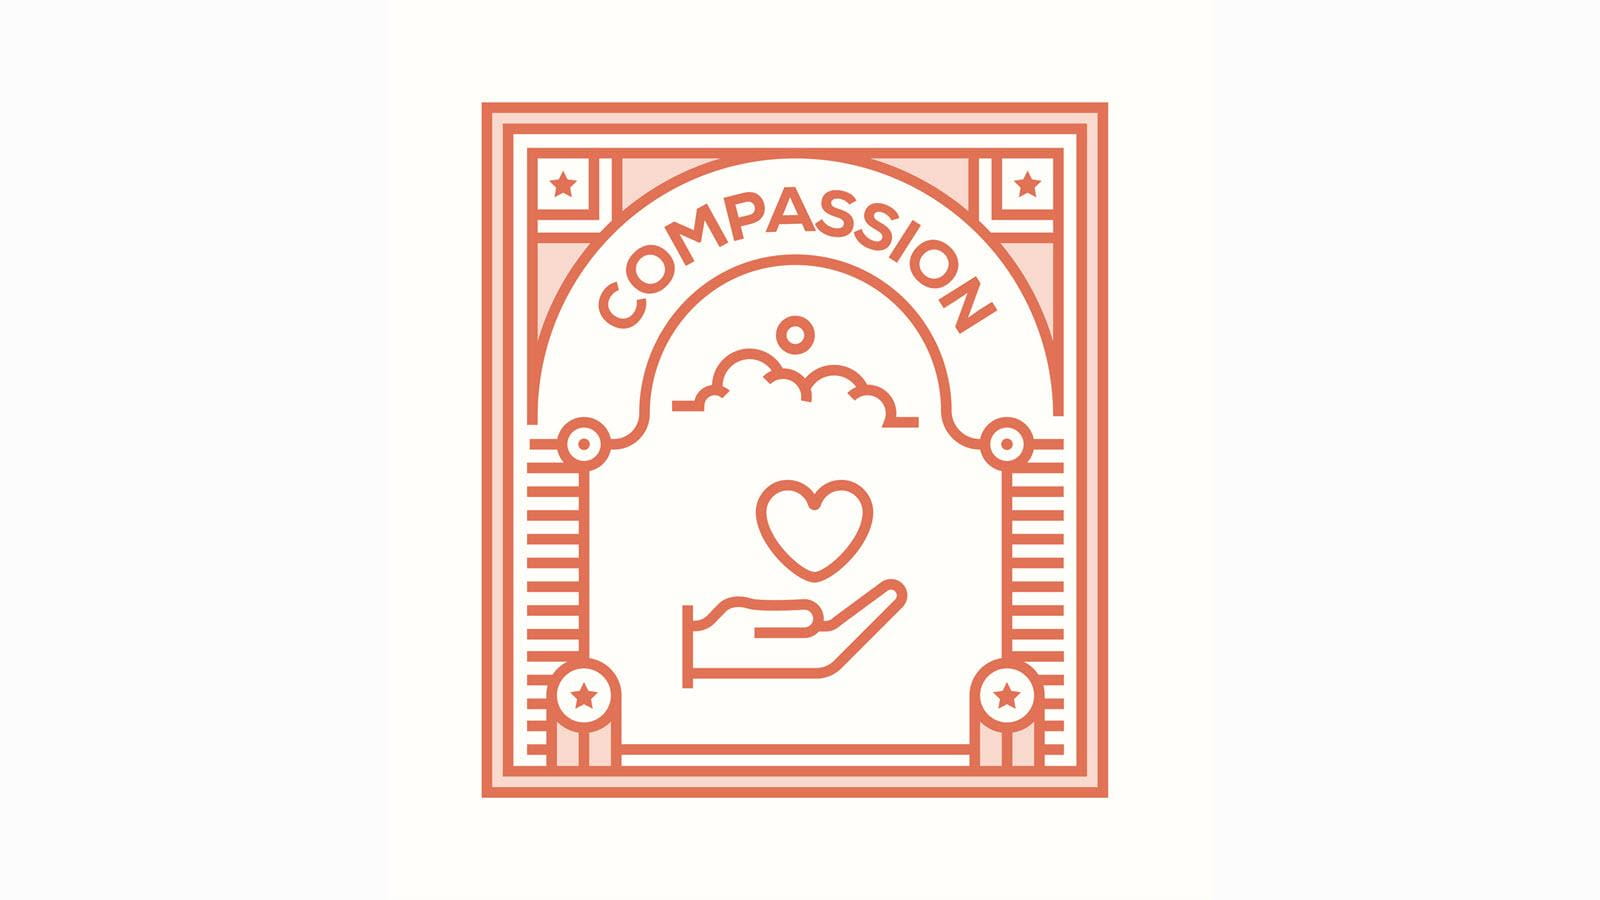 Illustration of compassion with a hand holding a heart